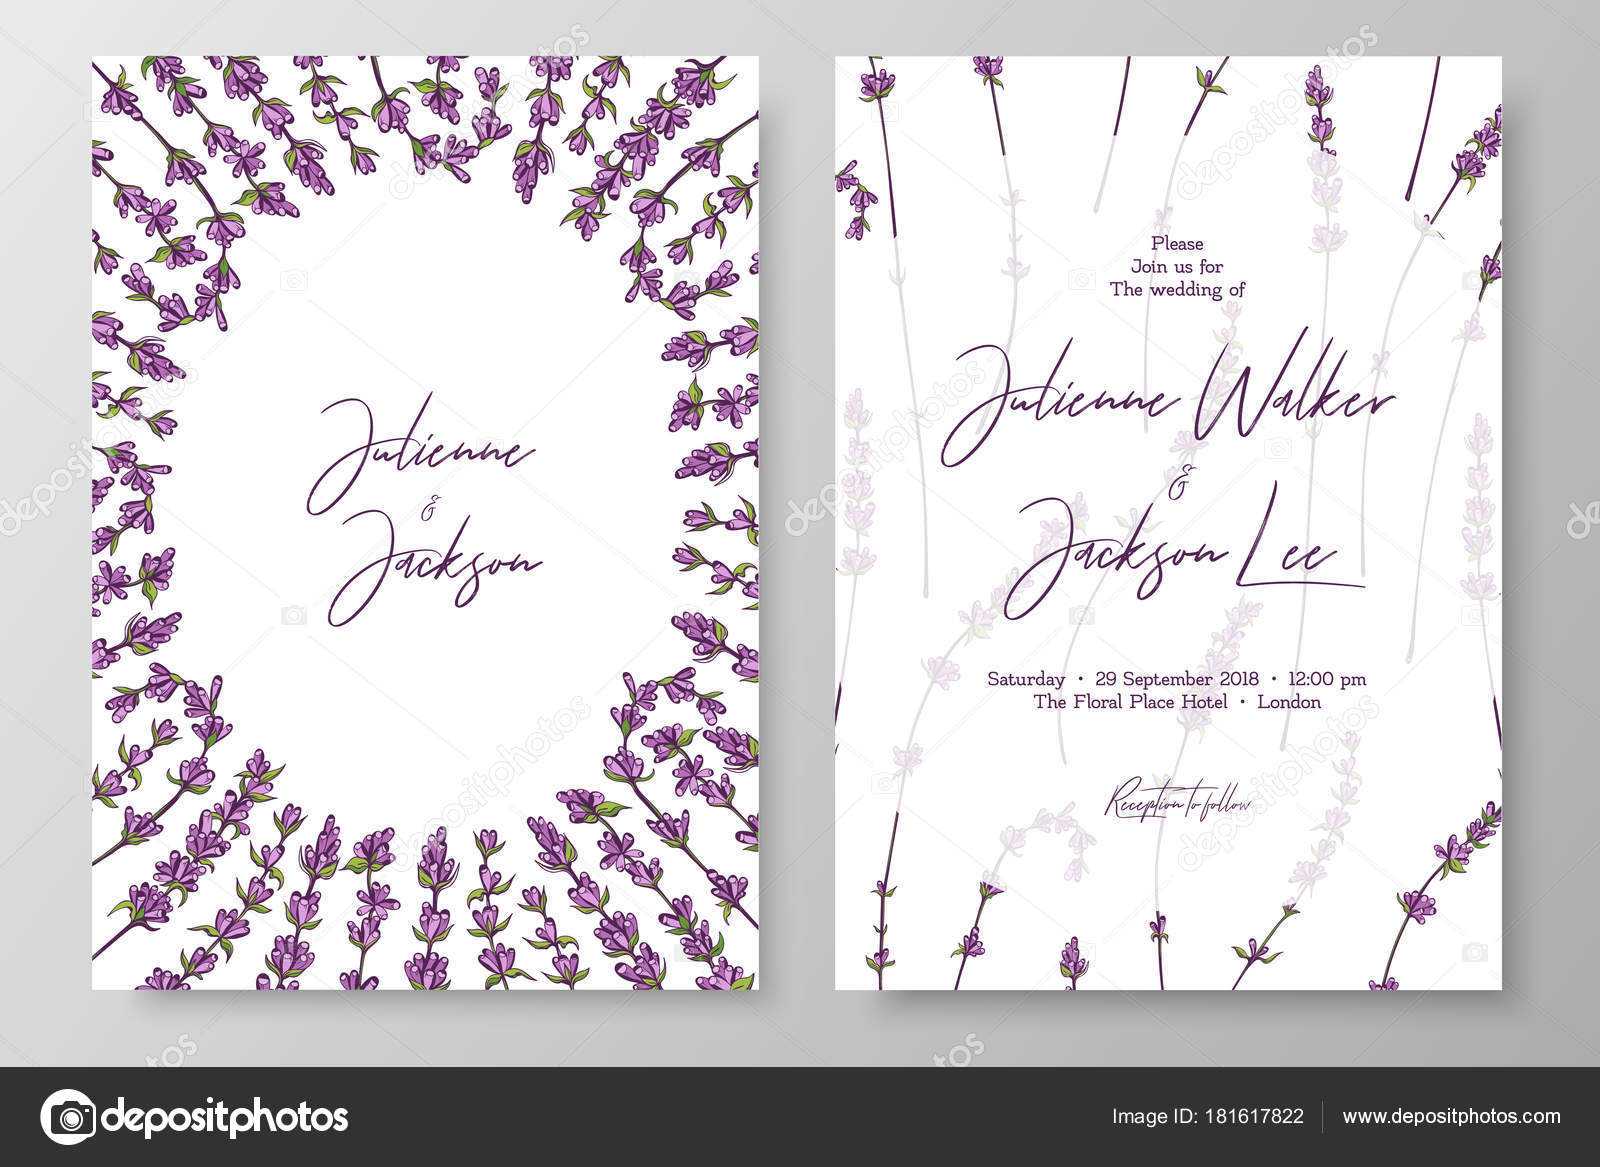 Wedding Invitation With Lavenders. Cards Templates For Save With Regard To Wedding Hotel Information Card Template